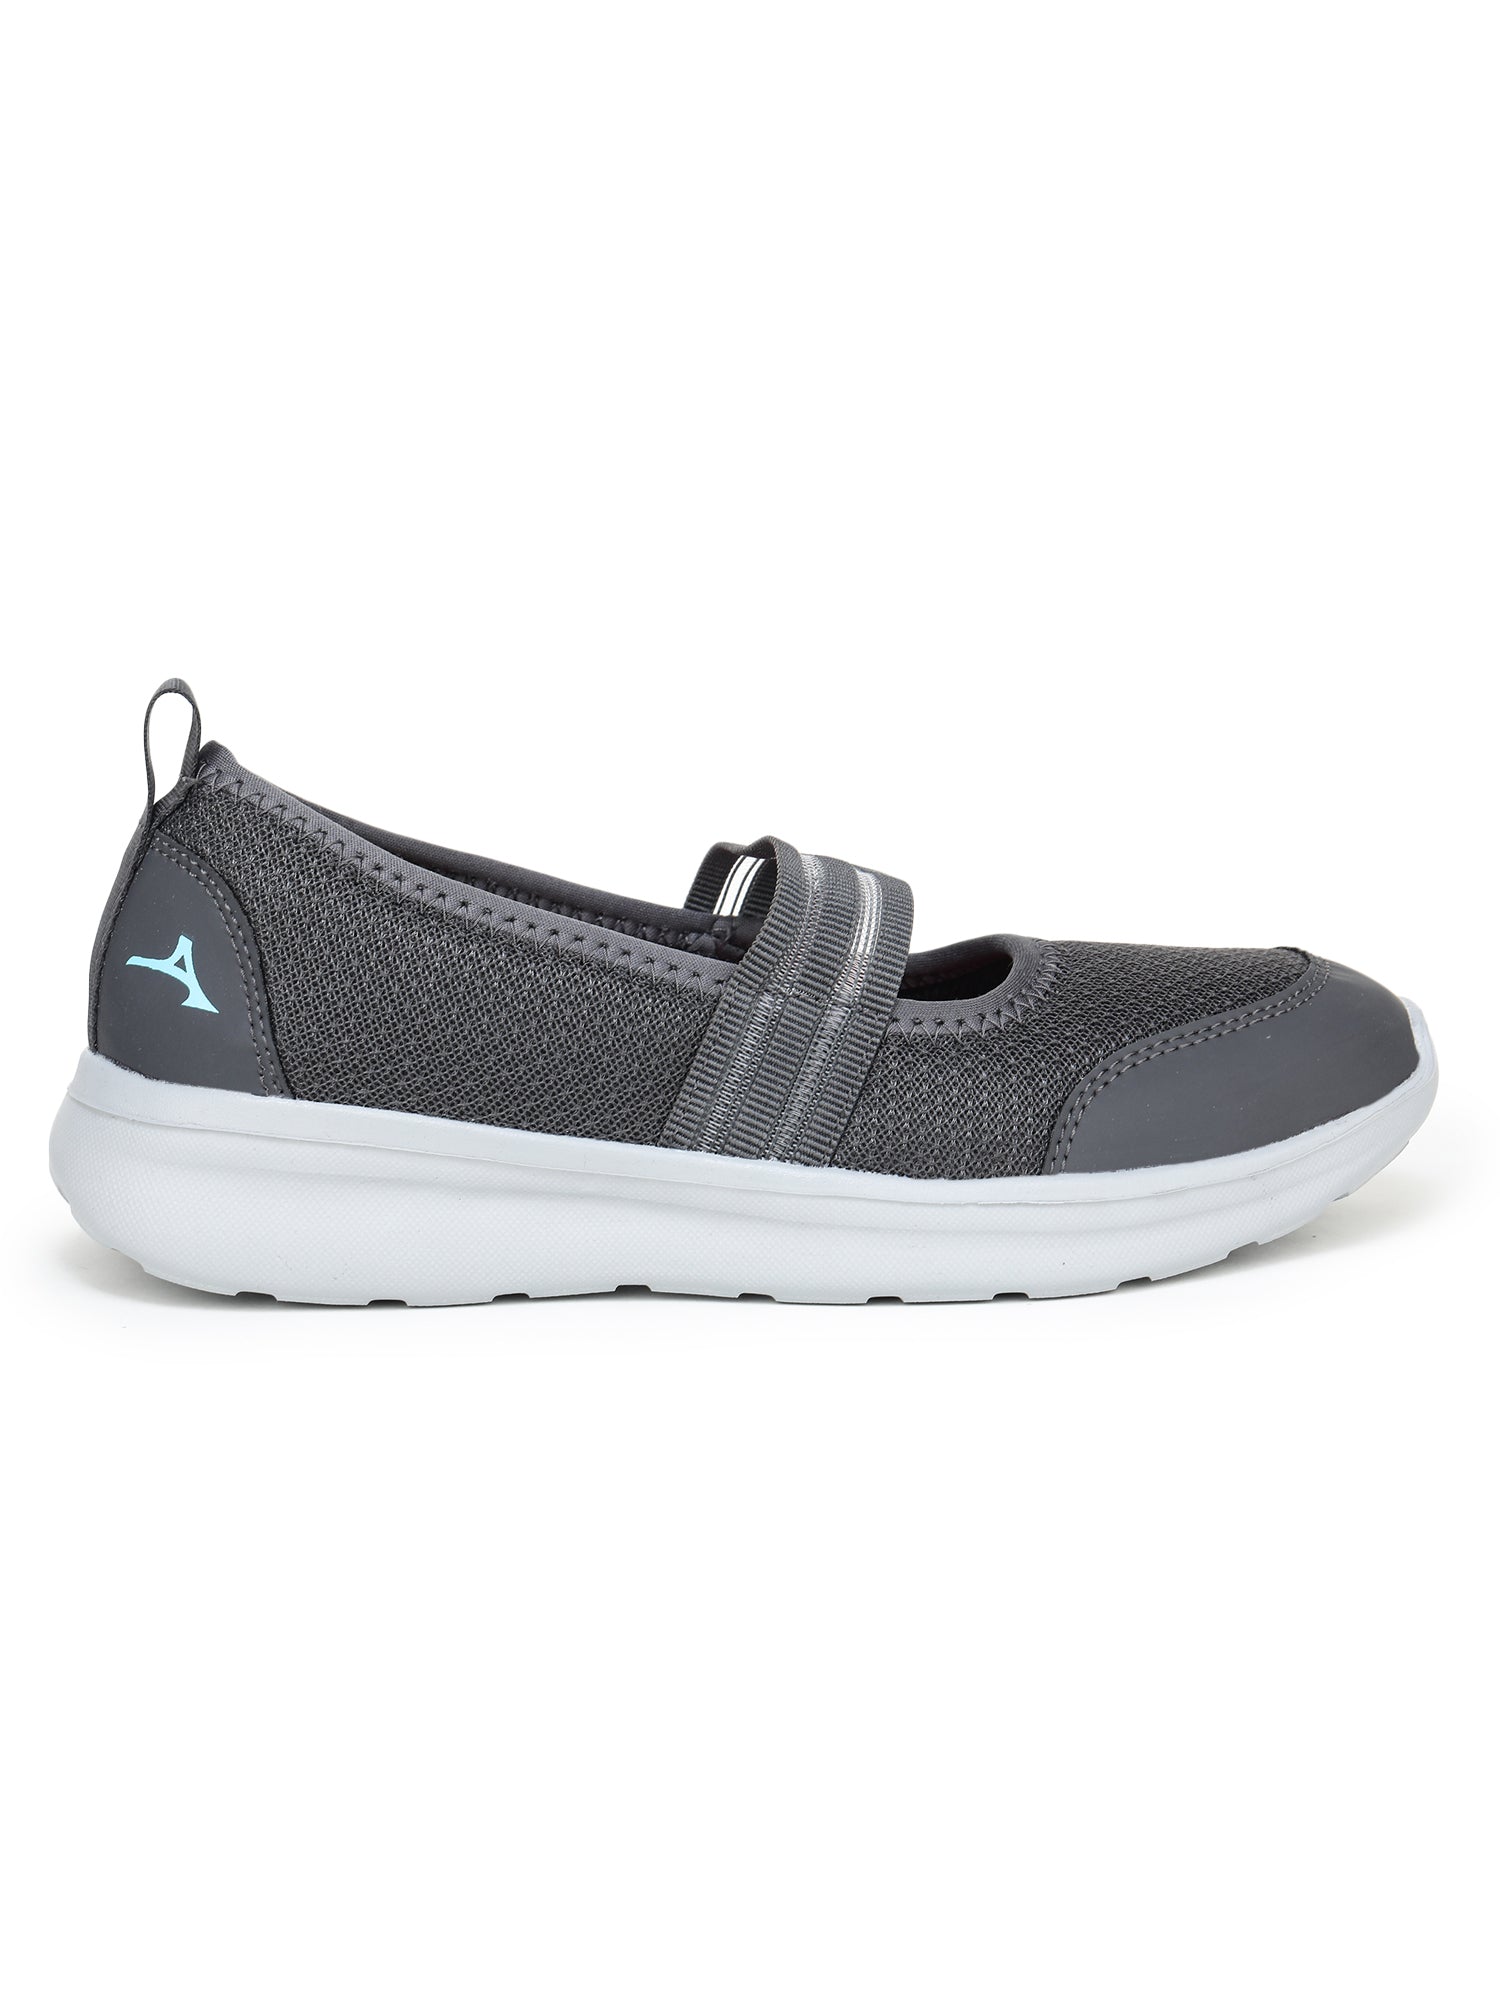 ABROS AMBER SPORTS SHOES FOR WOMEN